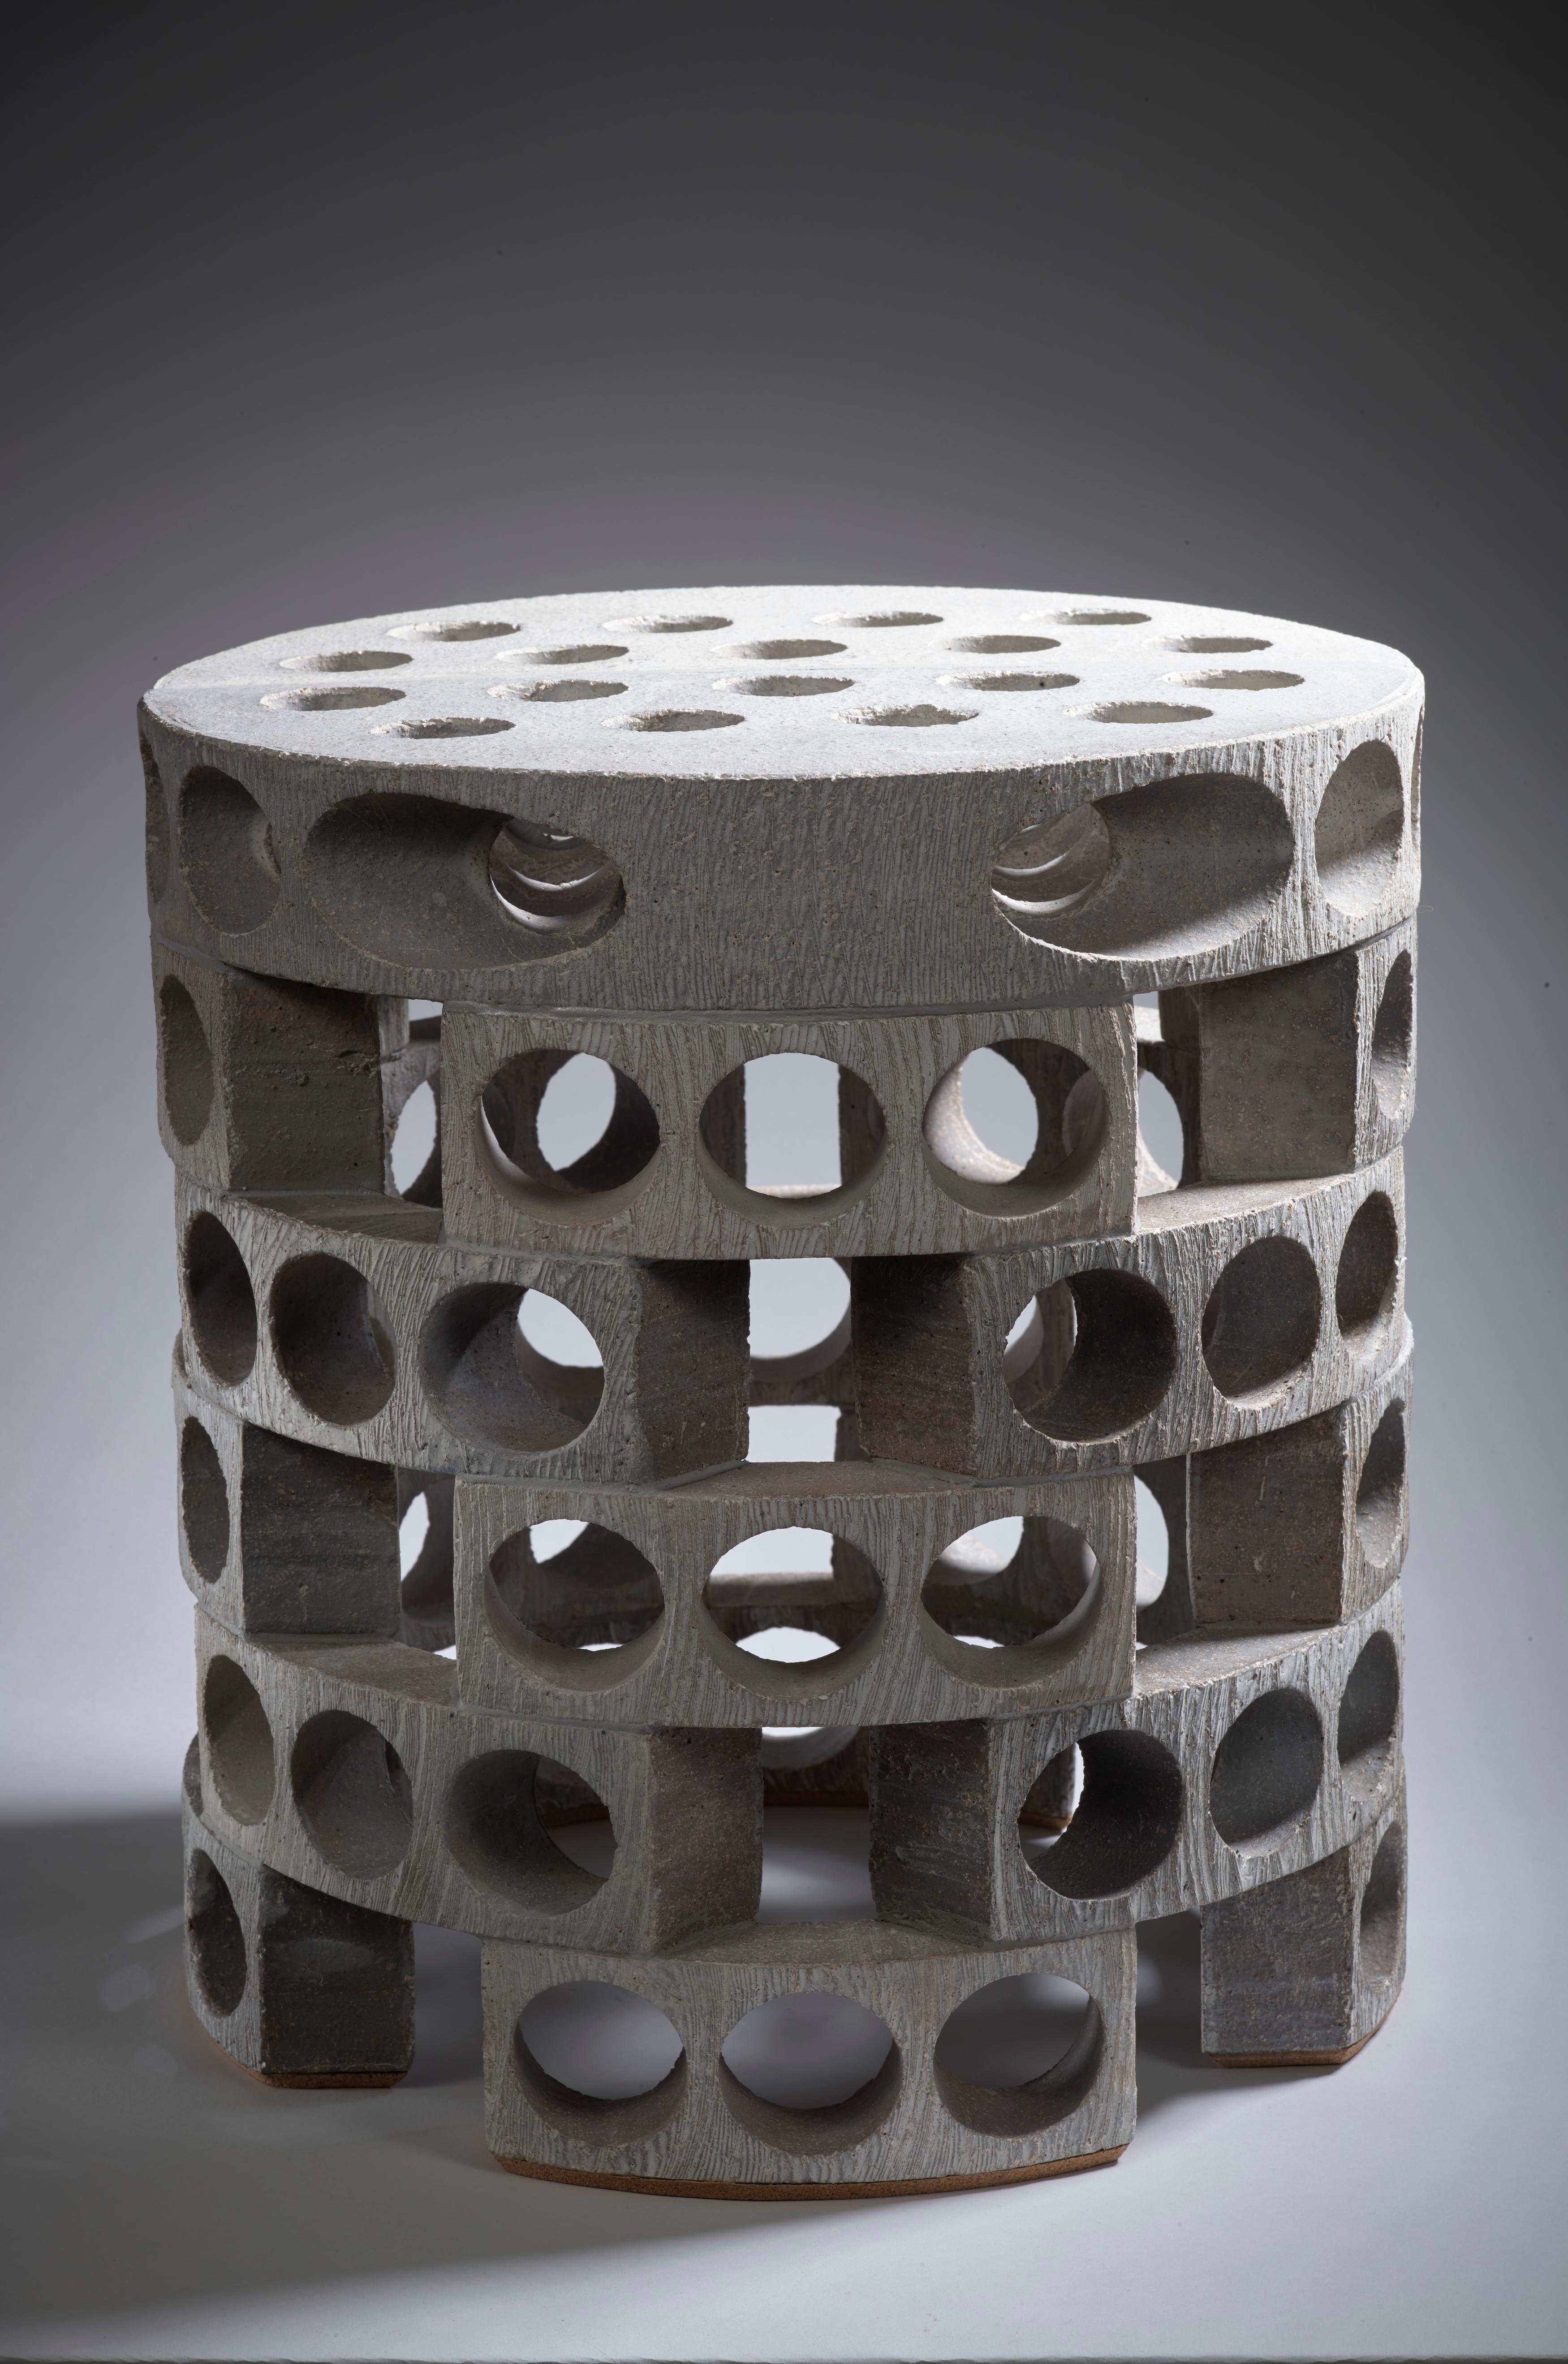 Maarten Stuer (born in 1965)
Stuul I-2021-08-07, 2021
Open-worked stoneware and engobe stool
Signed with the monogram and dated as the title

Created both for indoors and outdoors. 
 
Graduate of the Royal Academy of Fine Arts in Antwerp, where he